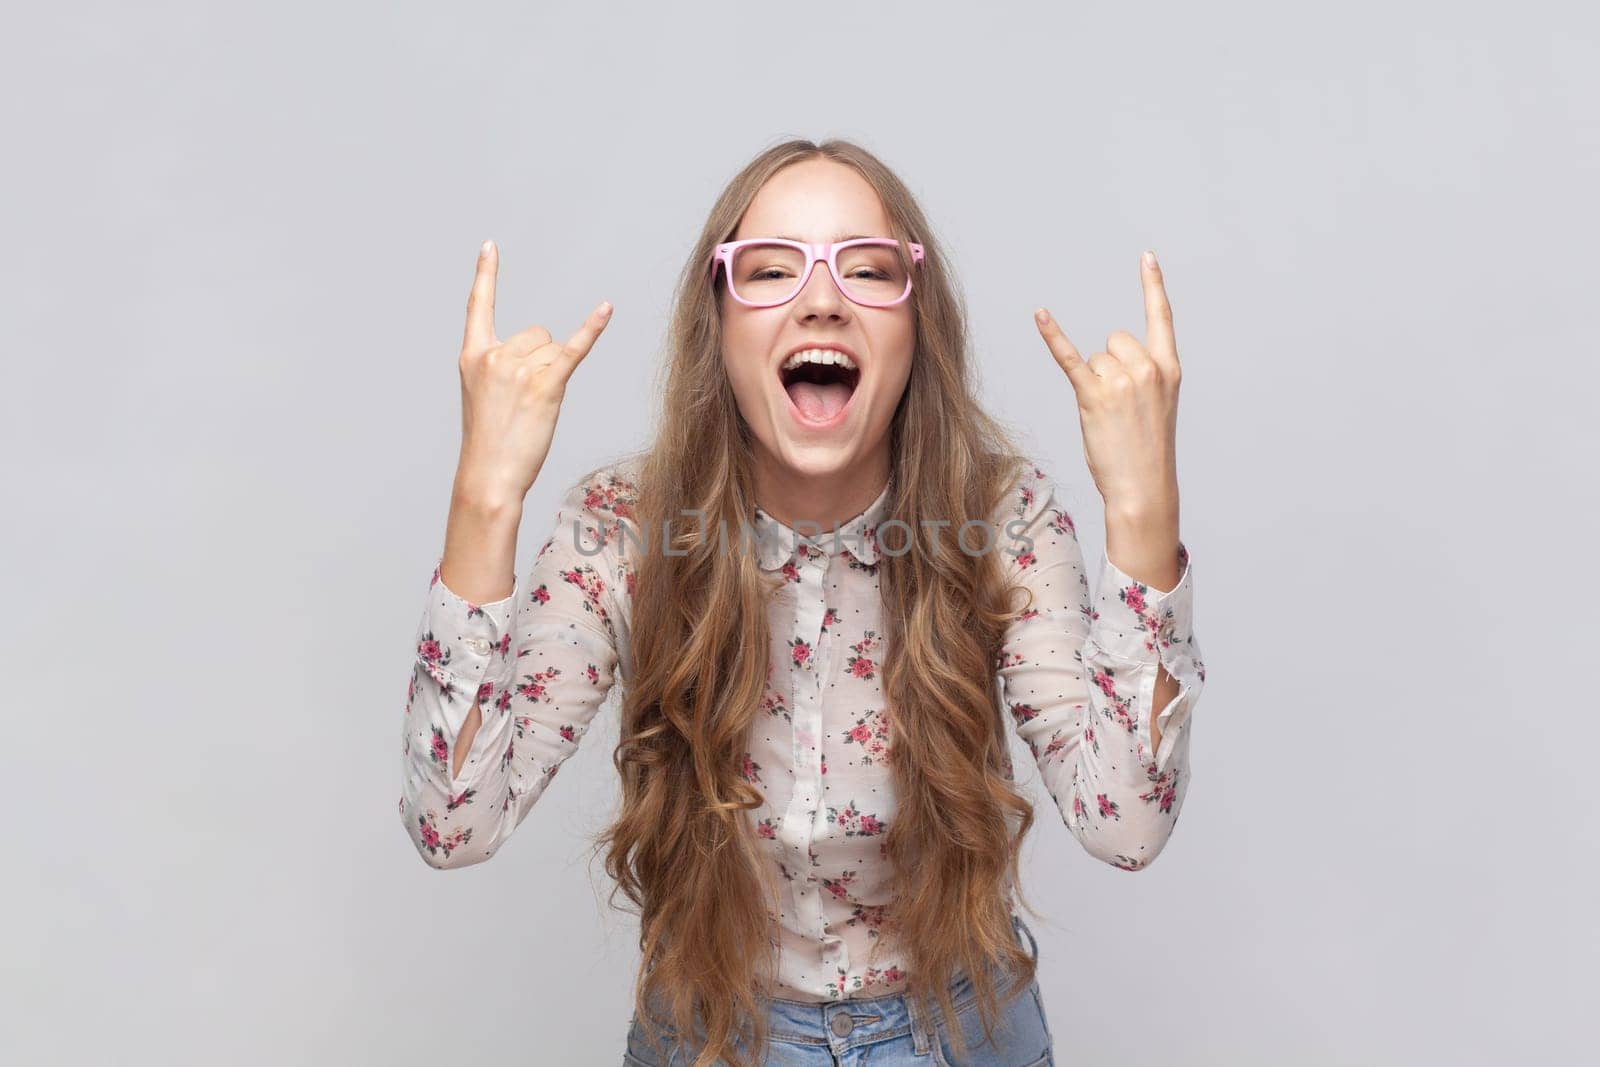 Rock n roll. Portrait of woman in glasses with wavy blond hair standing with rock sing, screaming yelling with excited facial expression. Indoor studio shot isolated on gray background.